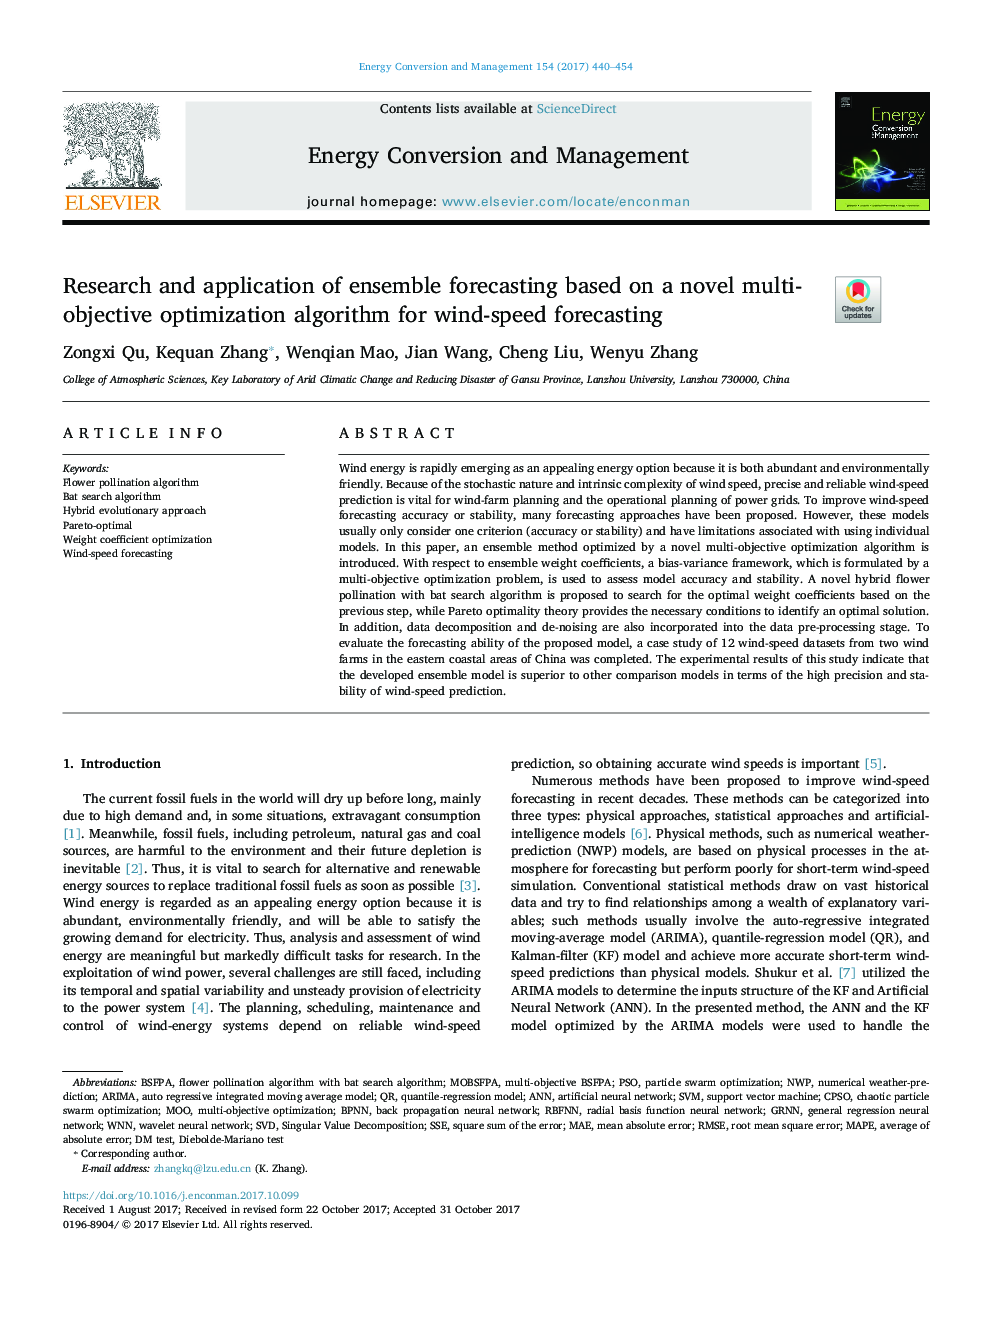 Research and application of ensemble forecasting based on a novel multi-objective optimization algorithm for wind-speed forecasting